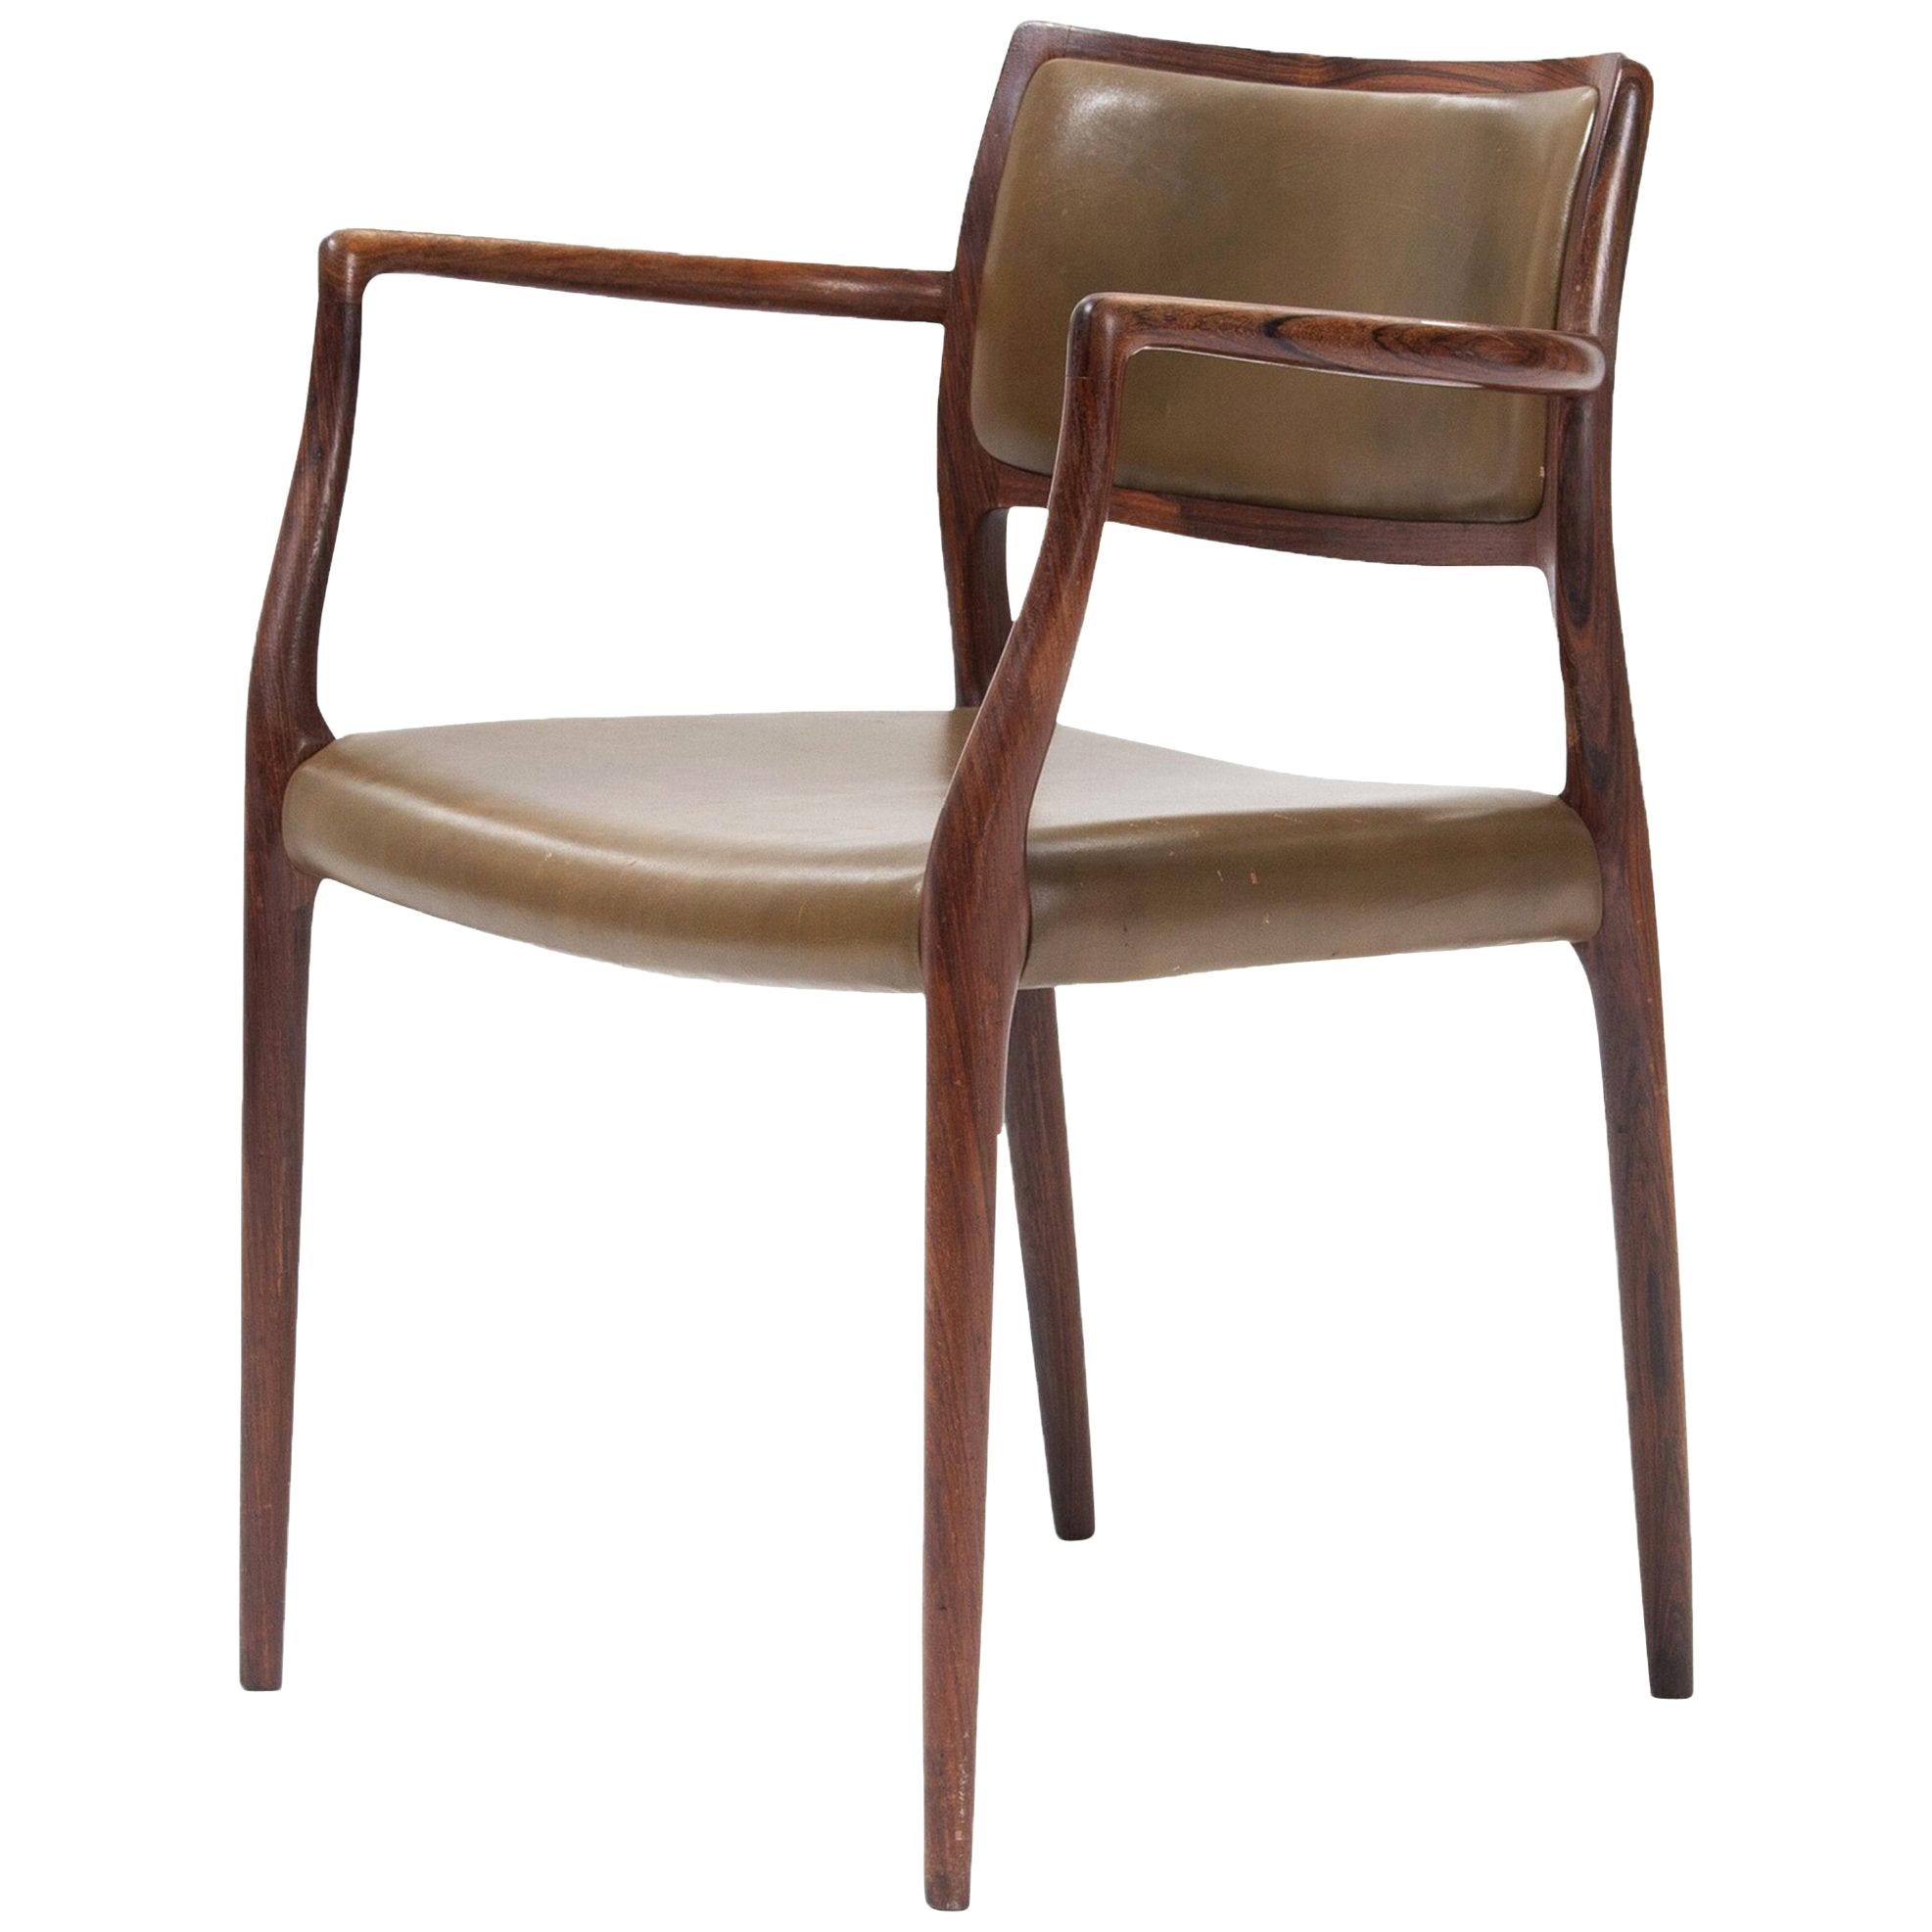 Midcentury Niels O. Møller '65' Armchair with Olive Green Leather Seat and Back